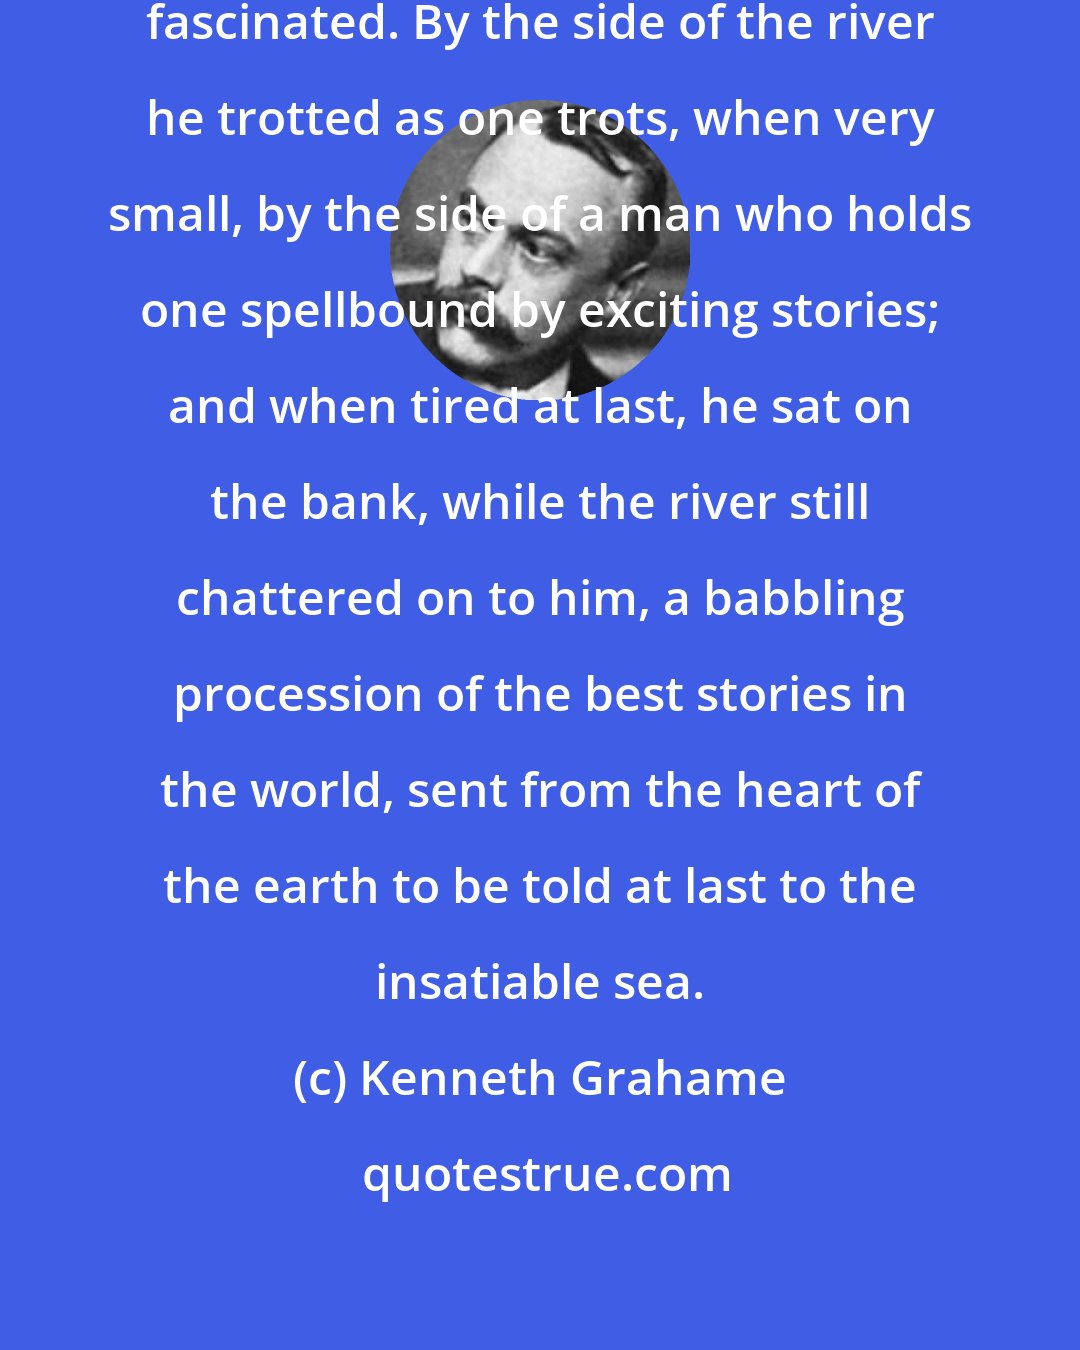 Kenneth Grahame: The Mole was bewitched, entranced, fascinated. By the side of the river he trotted as one trots, when very small, by the side of a man who holds one spellbound by exciting stories; and when tired at last, he sat on the bank, while the river still chattered on to him, a babbling procession of the best stories in the world, sent from the heart of the earth to be told at last to the insatiable sea.